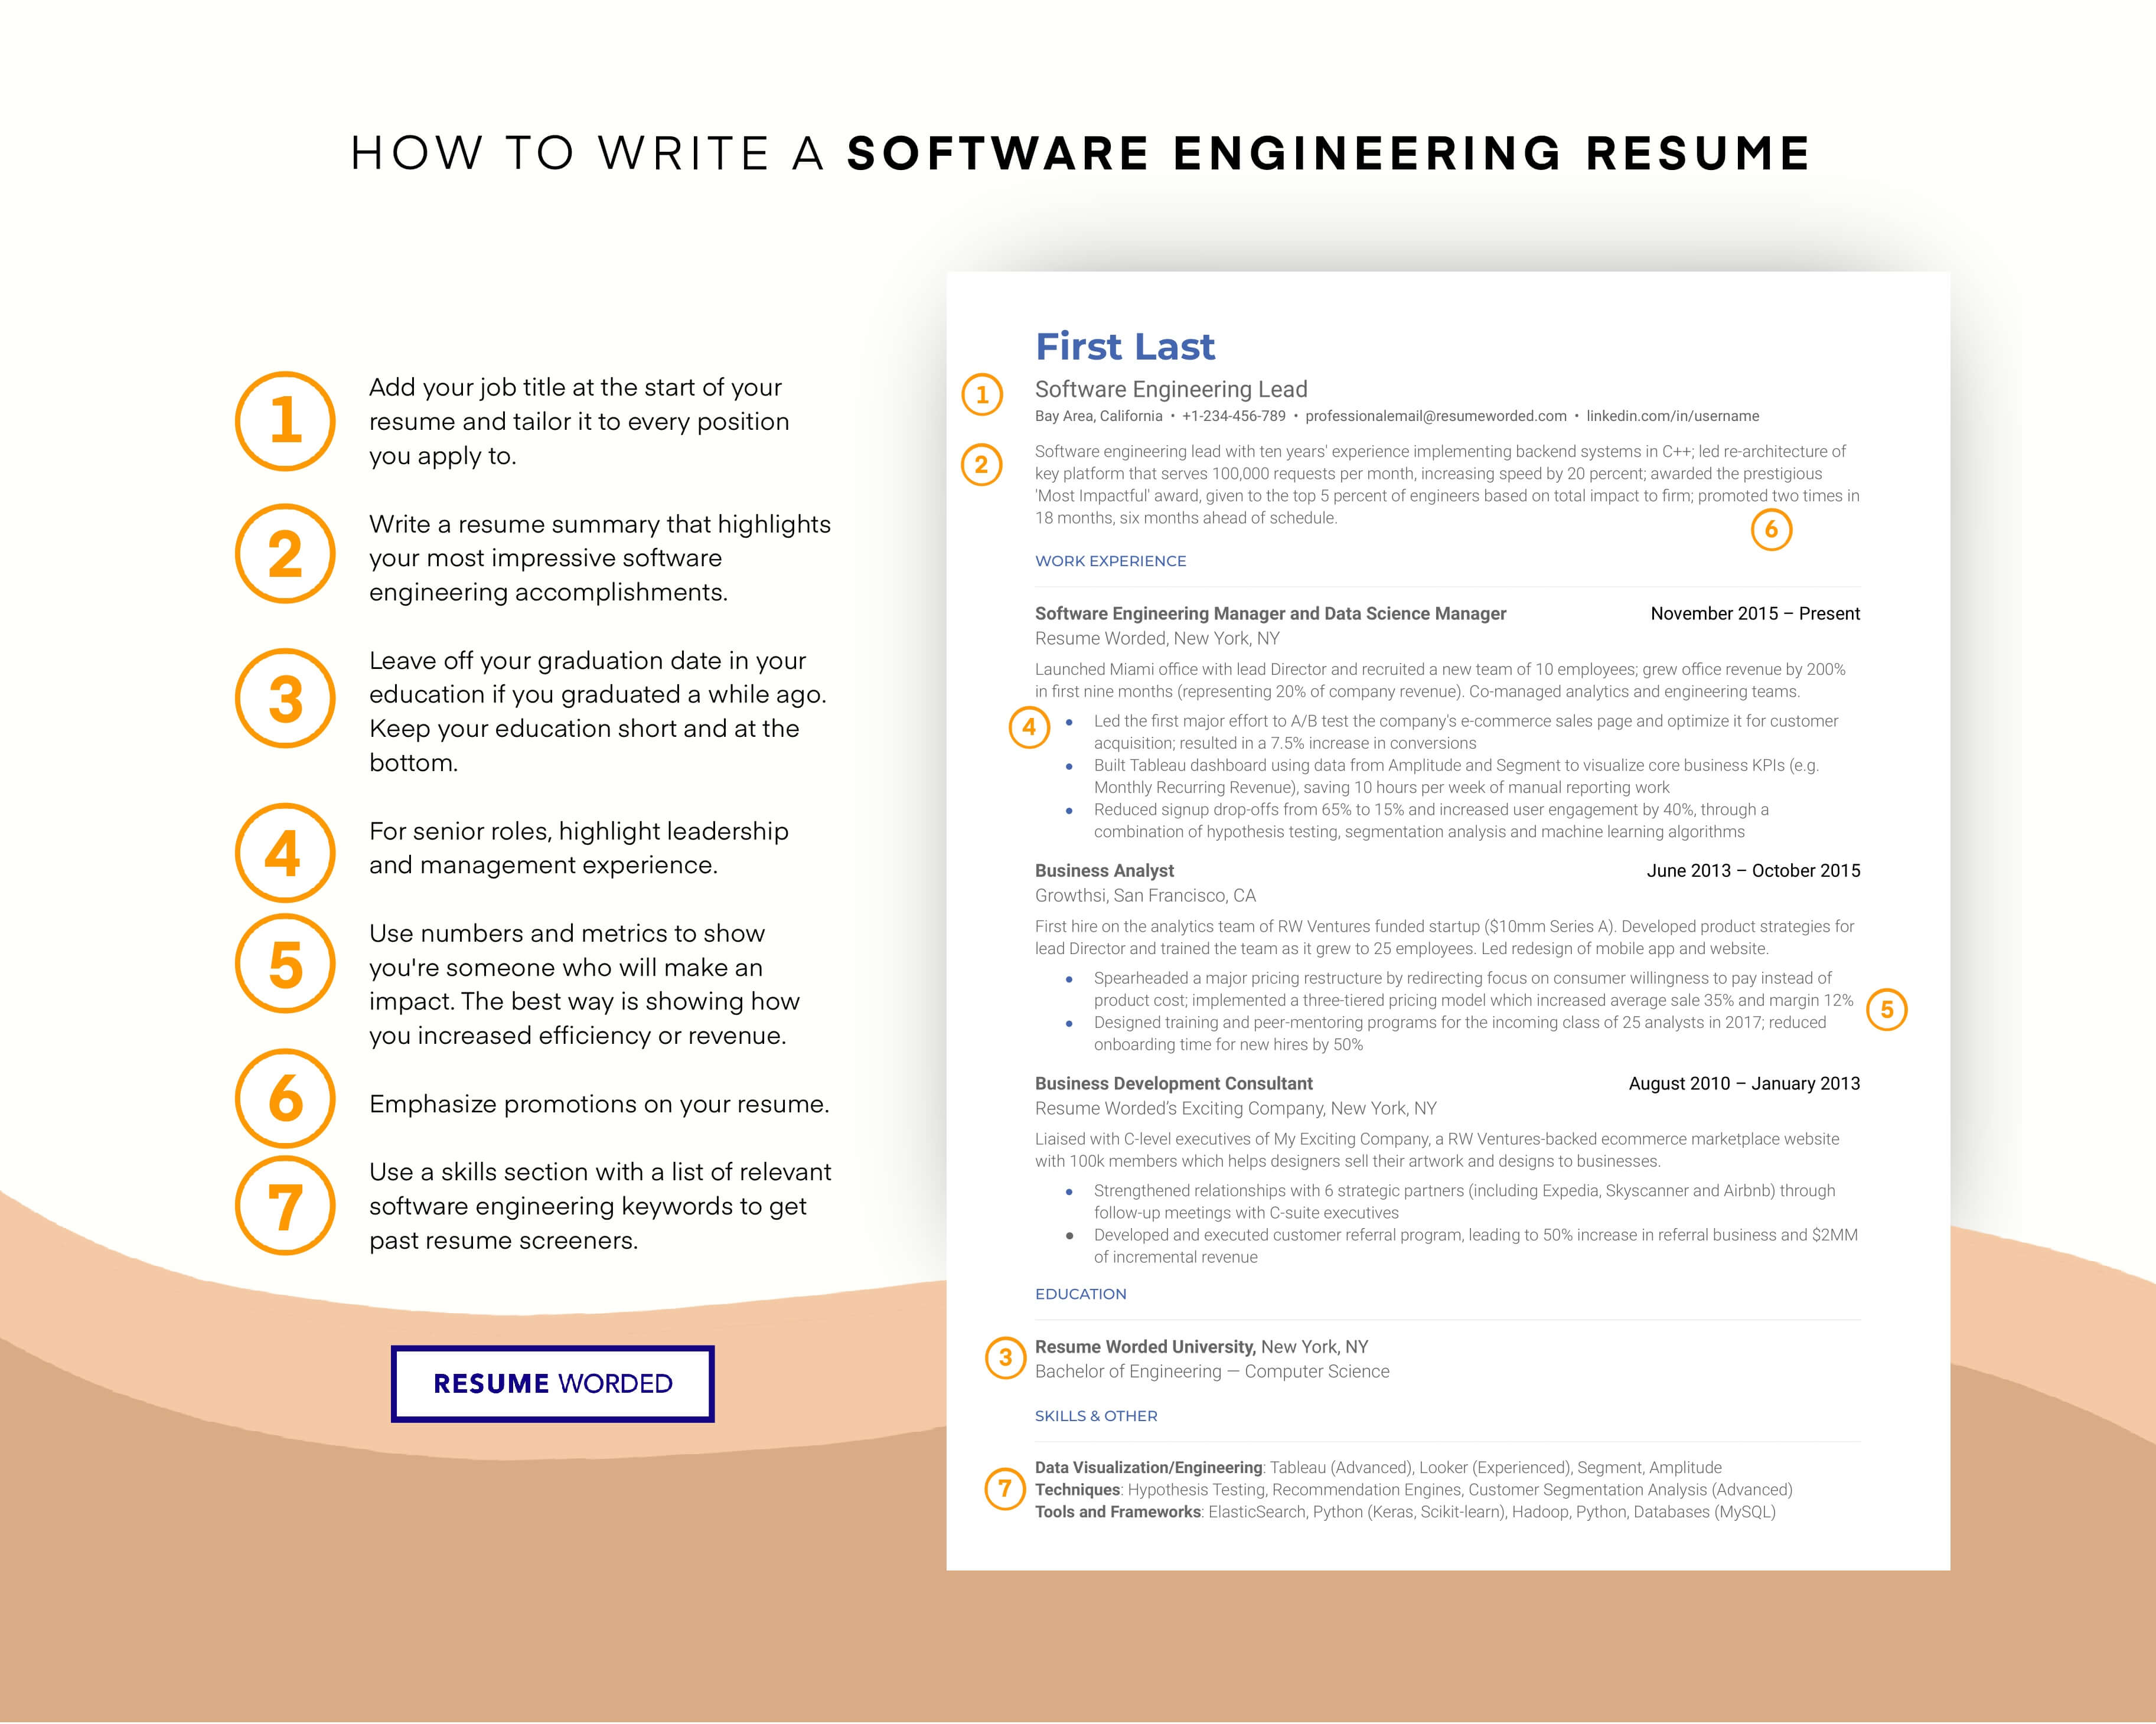 Showcase your experience in programming languages and automation - Software Development Engineer in Test (SDET) CV